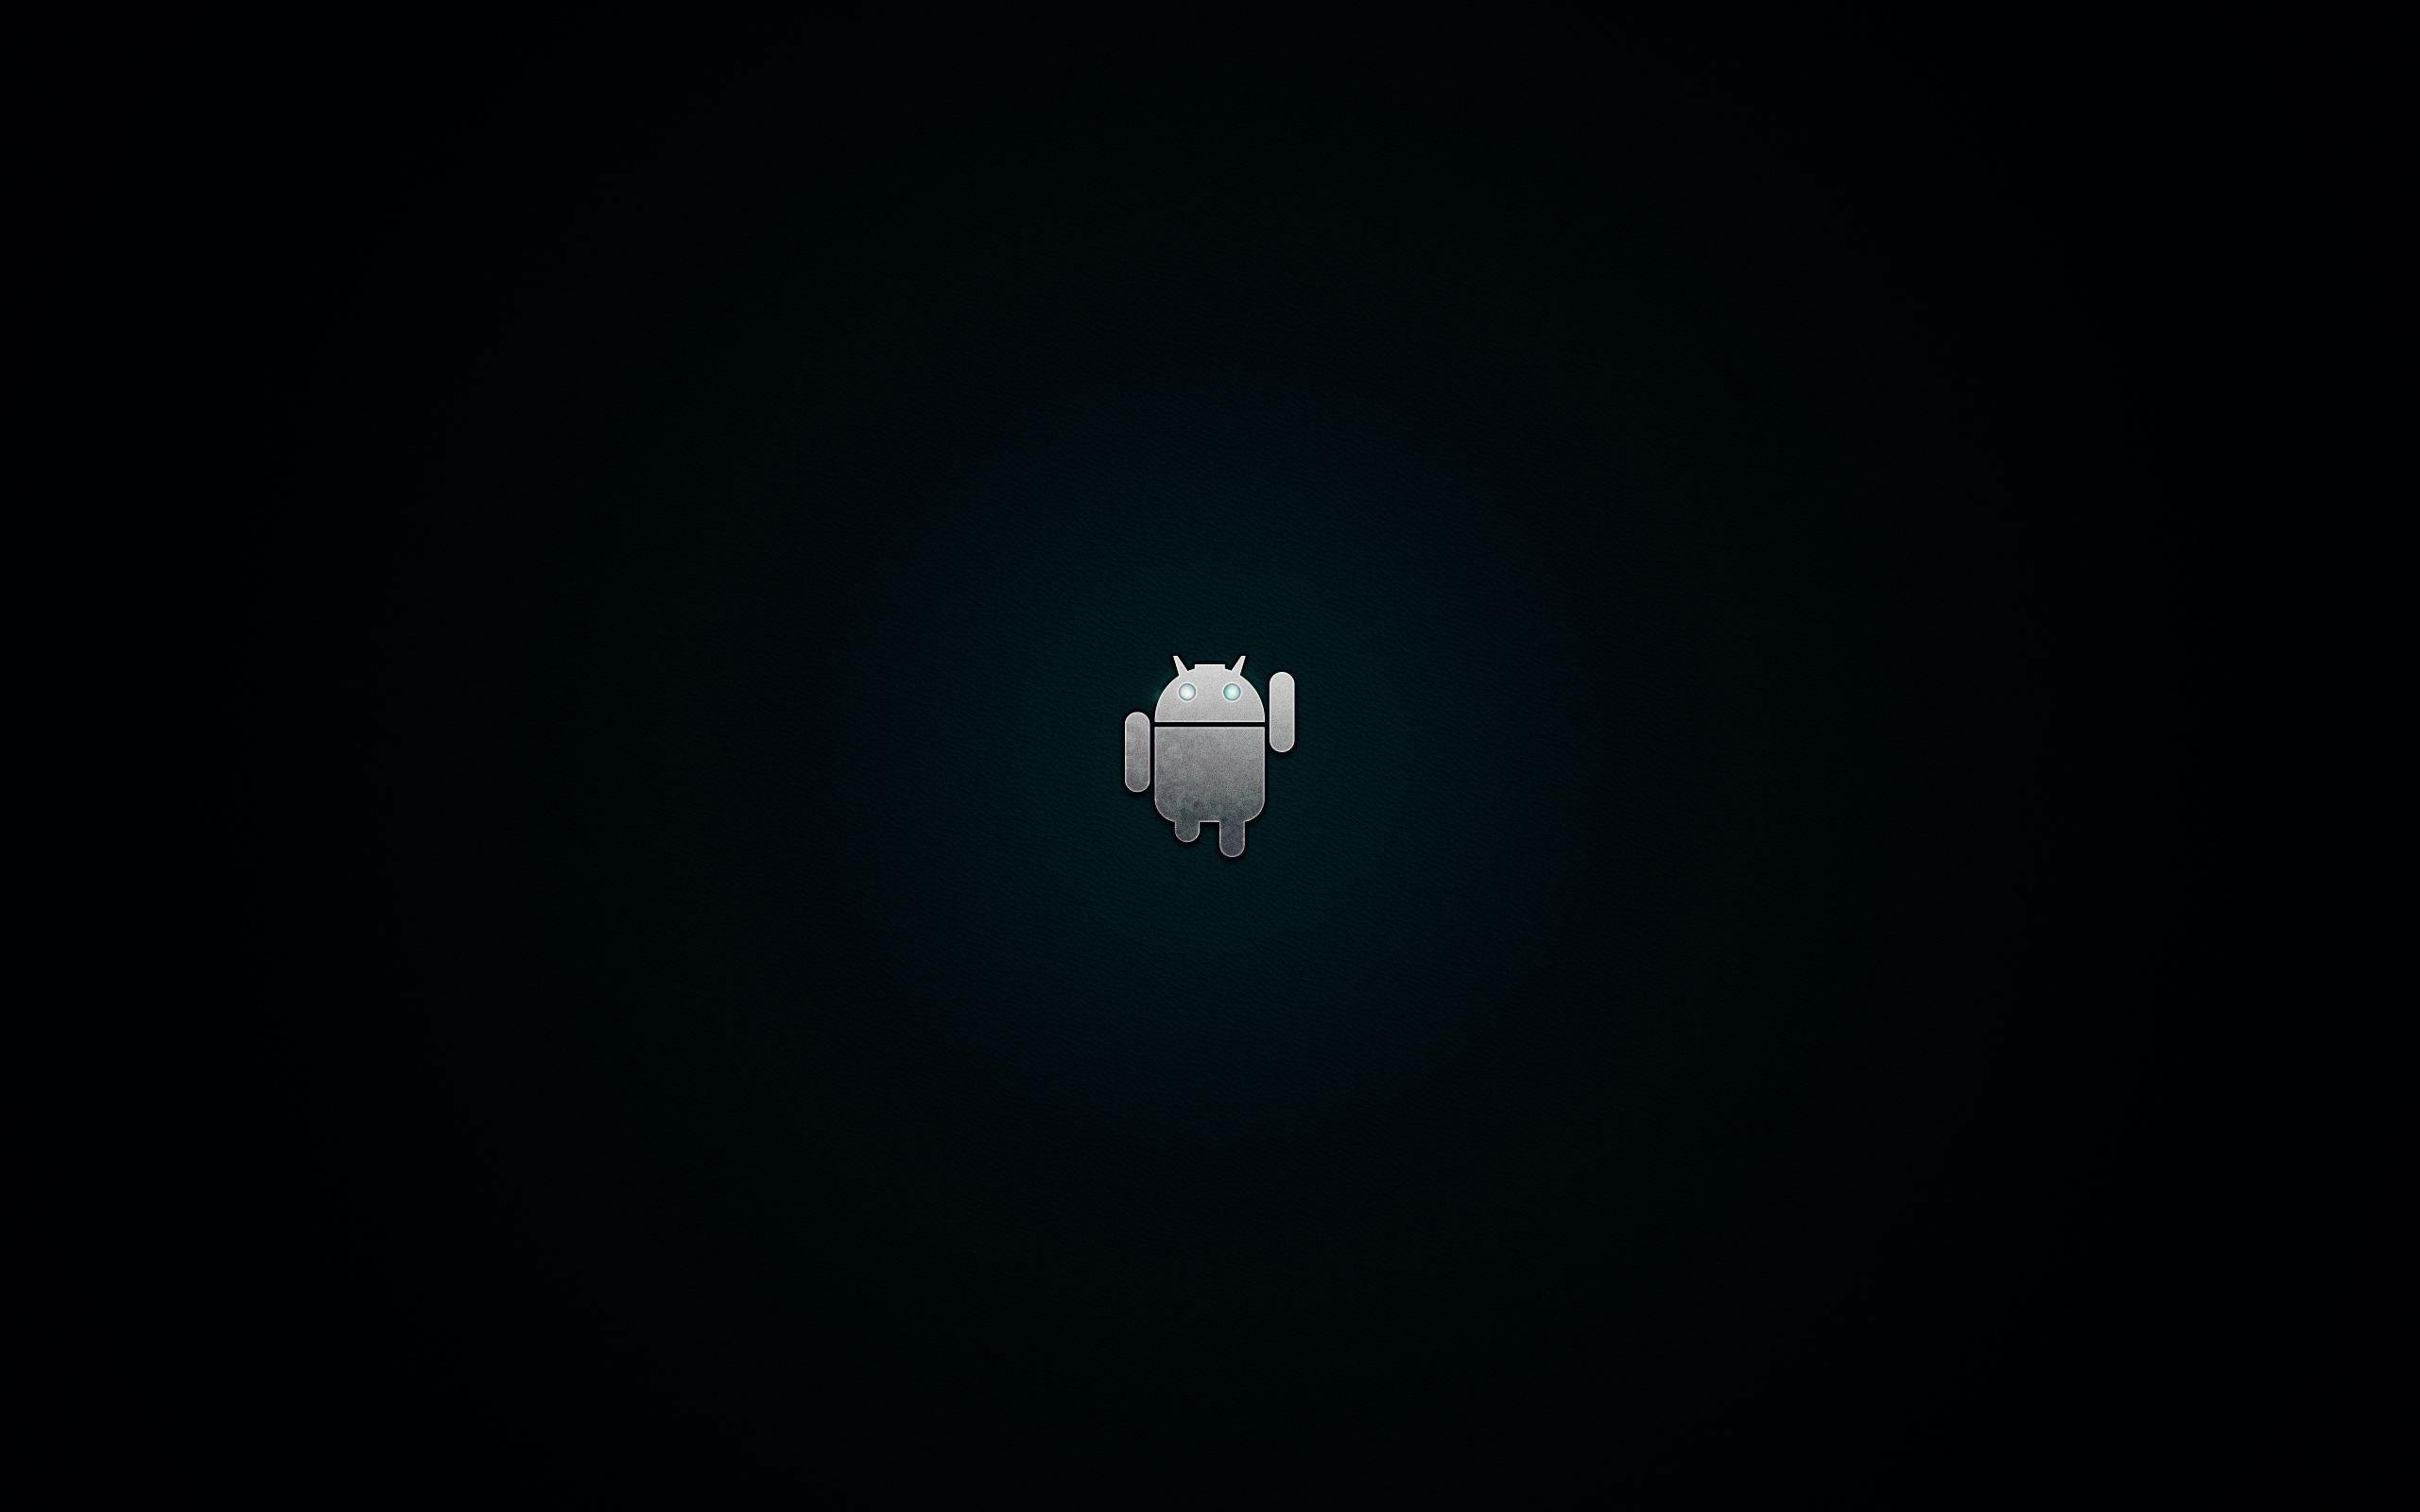 android logo black and white wallpaper. Android. White